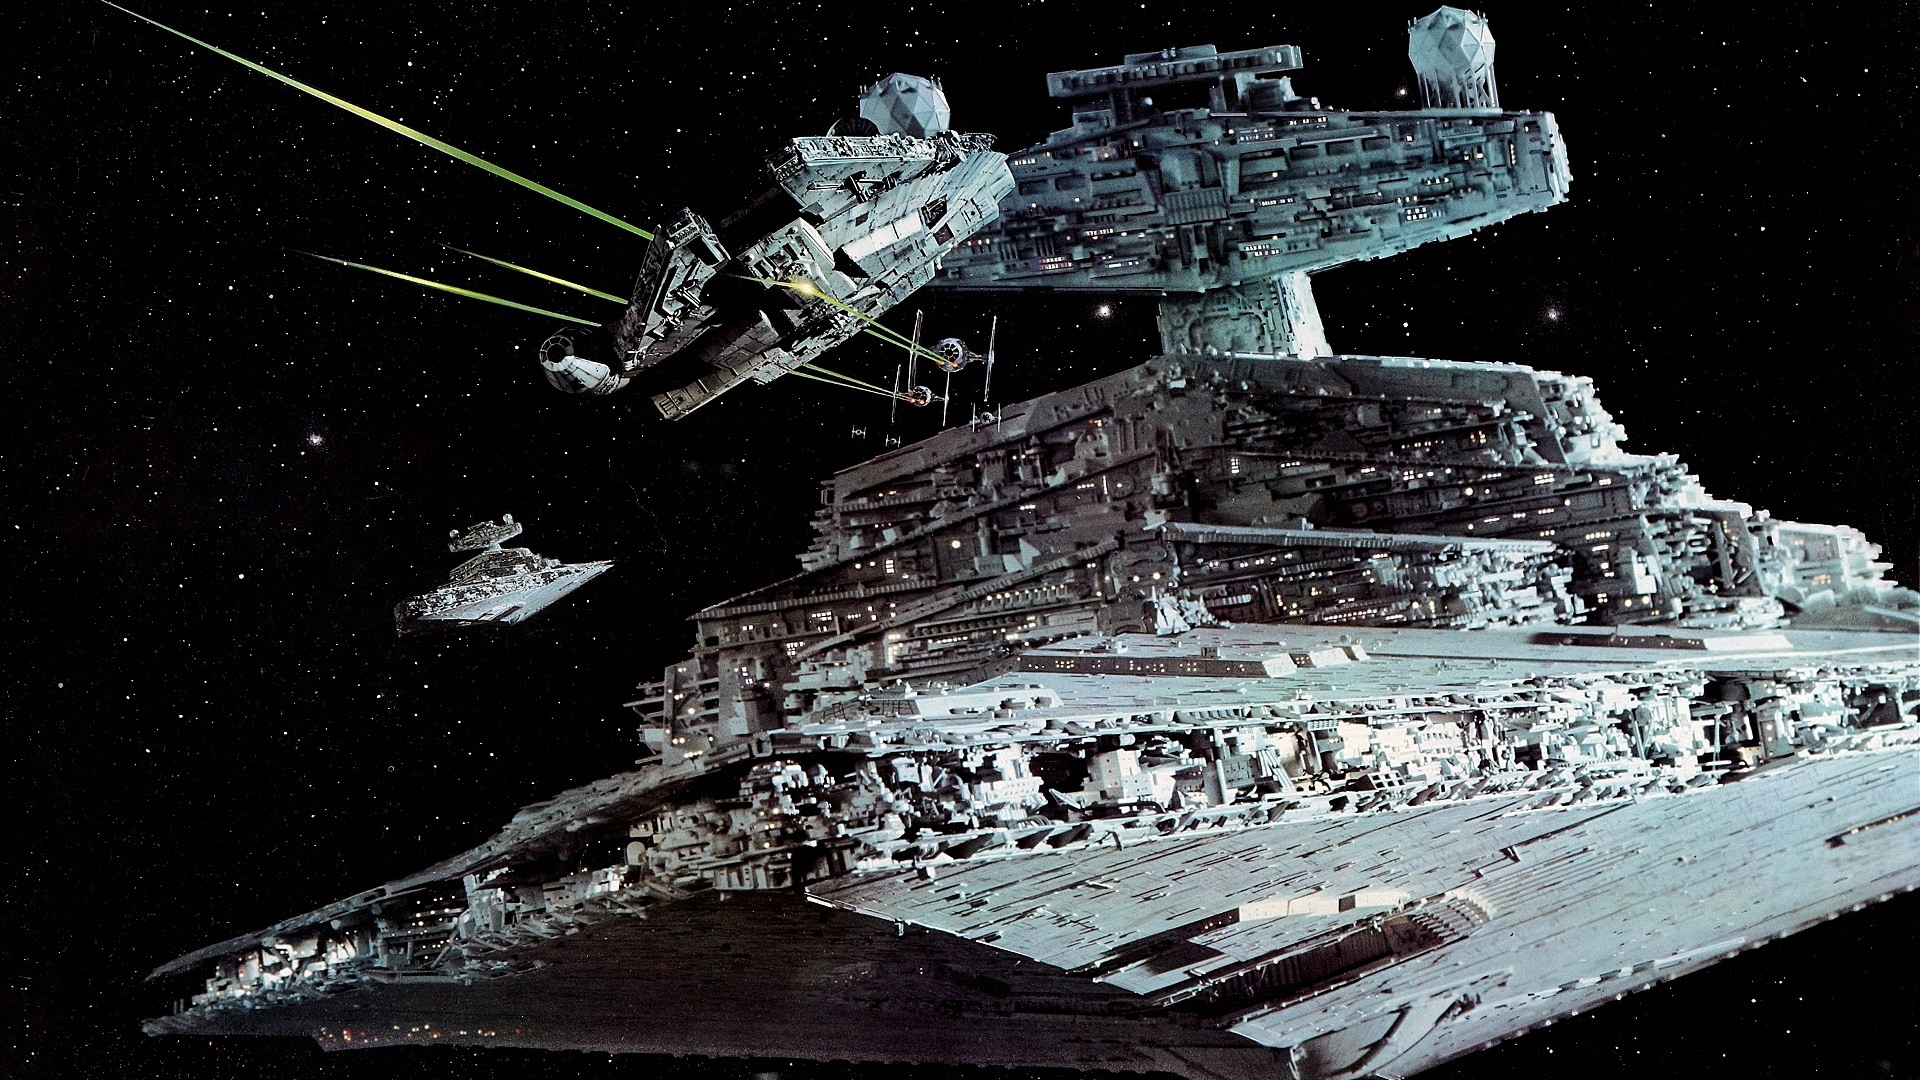 General 1920x1080 Star Wars Galactic Empire Millennium Falcon Star Destroyer TIE Fighter Star Wars Ships Imperial Forces The Empire Strikes Back vehicle spaceship movies Star Wars: Episode V - The Empire Strikes Back